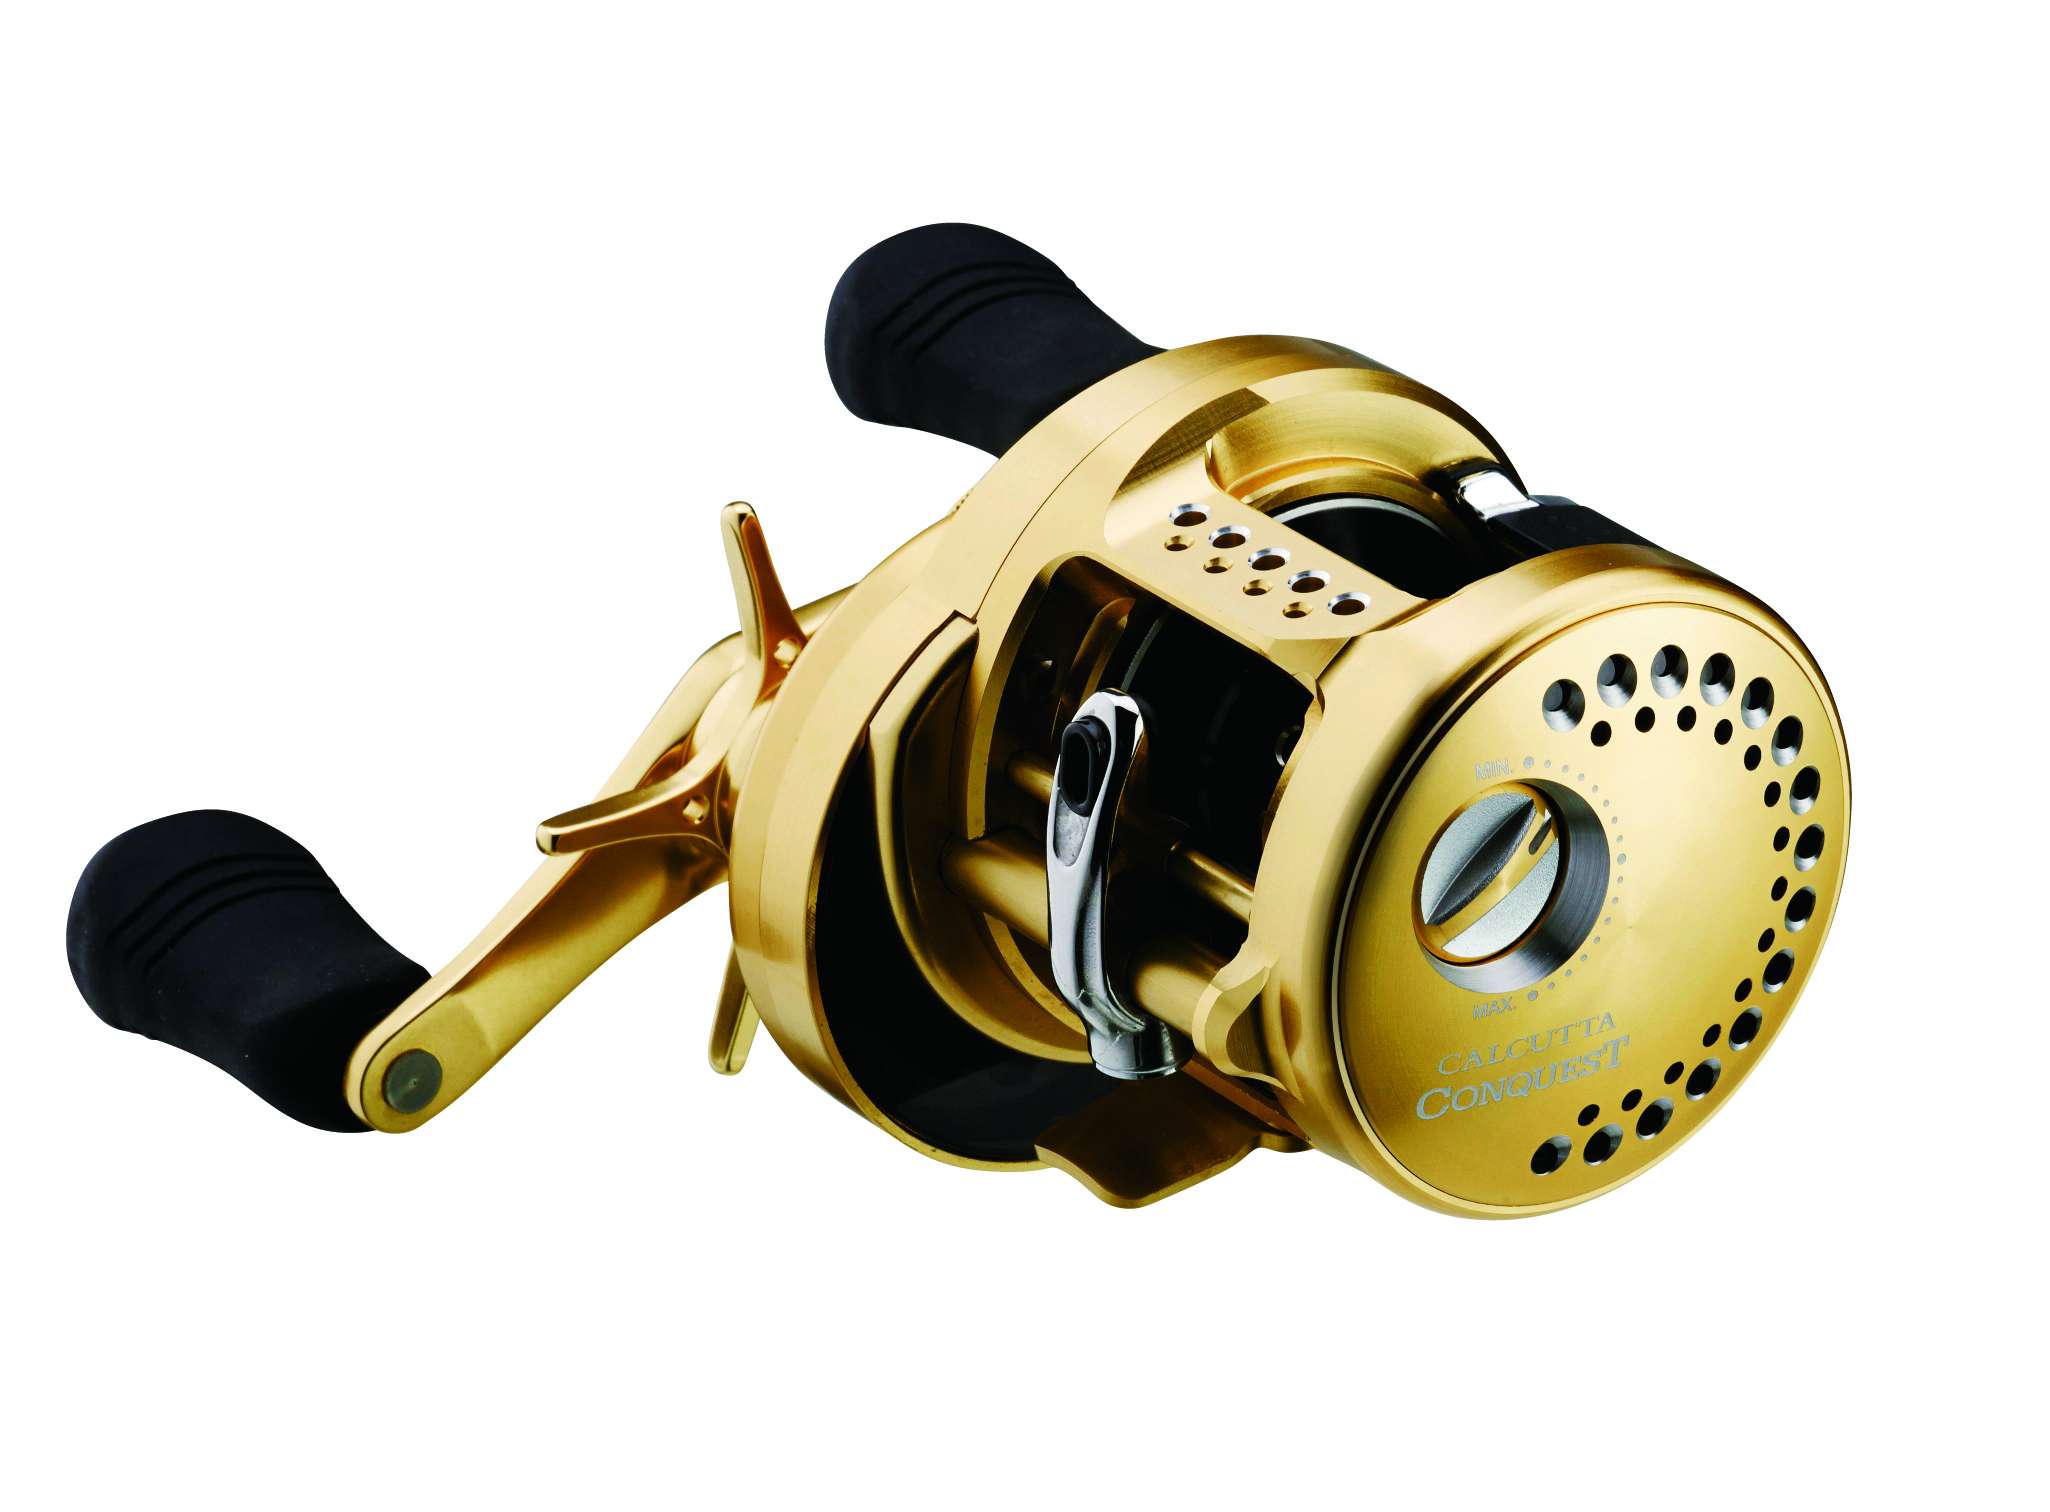 <p>Shimano Calcutta Conquest 1000 Round reels are reborn with the new Calcutta Conquest baitcasting series. A longtime benchmark among anglers for cranking due to its gears and durability, the Conquest continues with the Calcutta timeless design, and is now more compact and offers a higher level of performance.</p>
